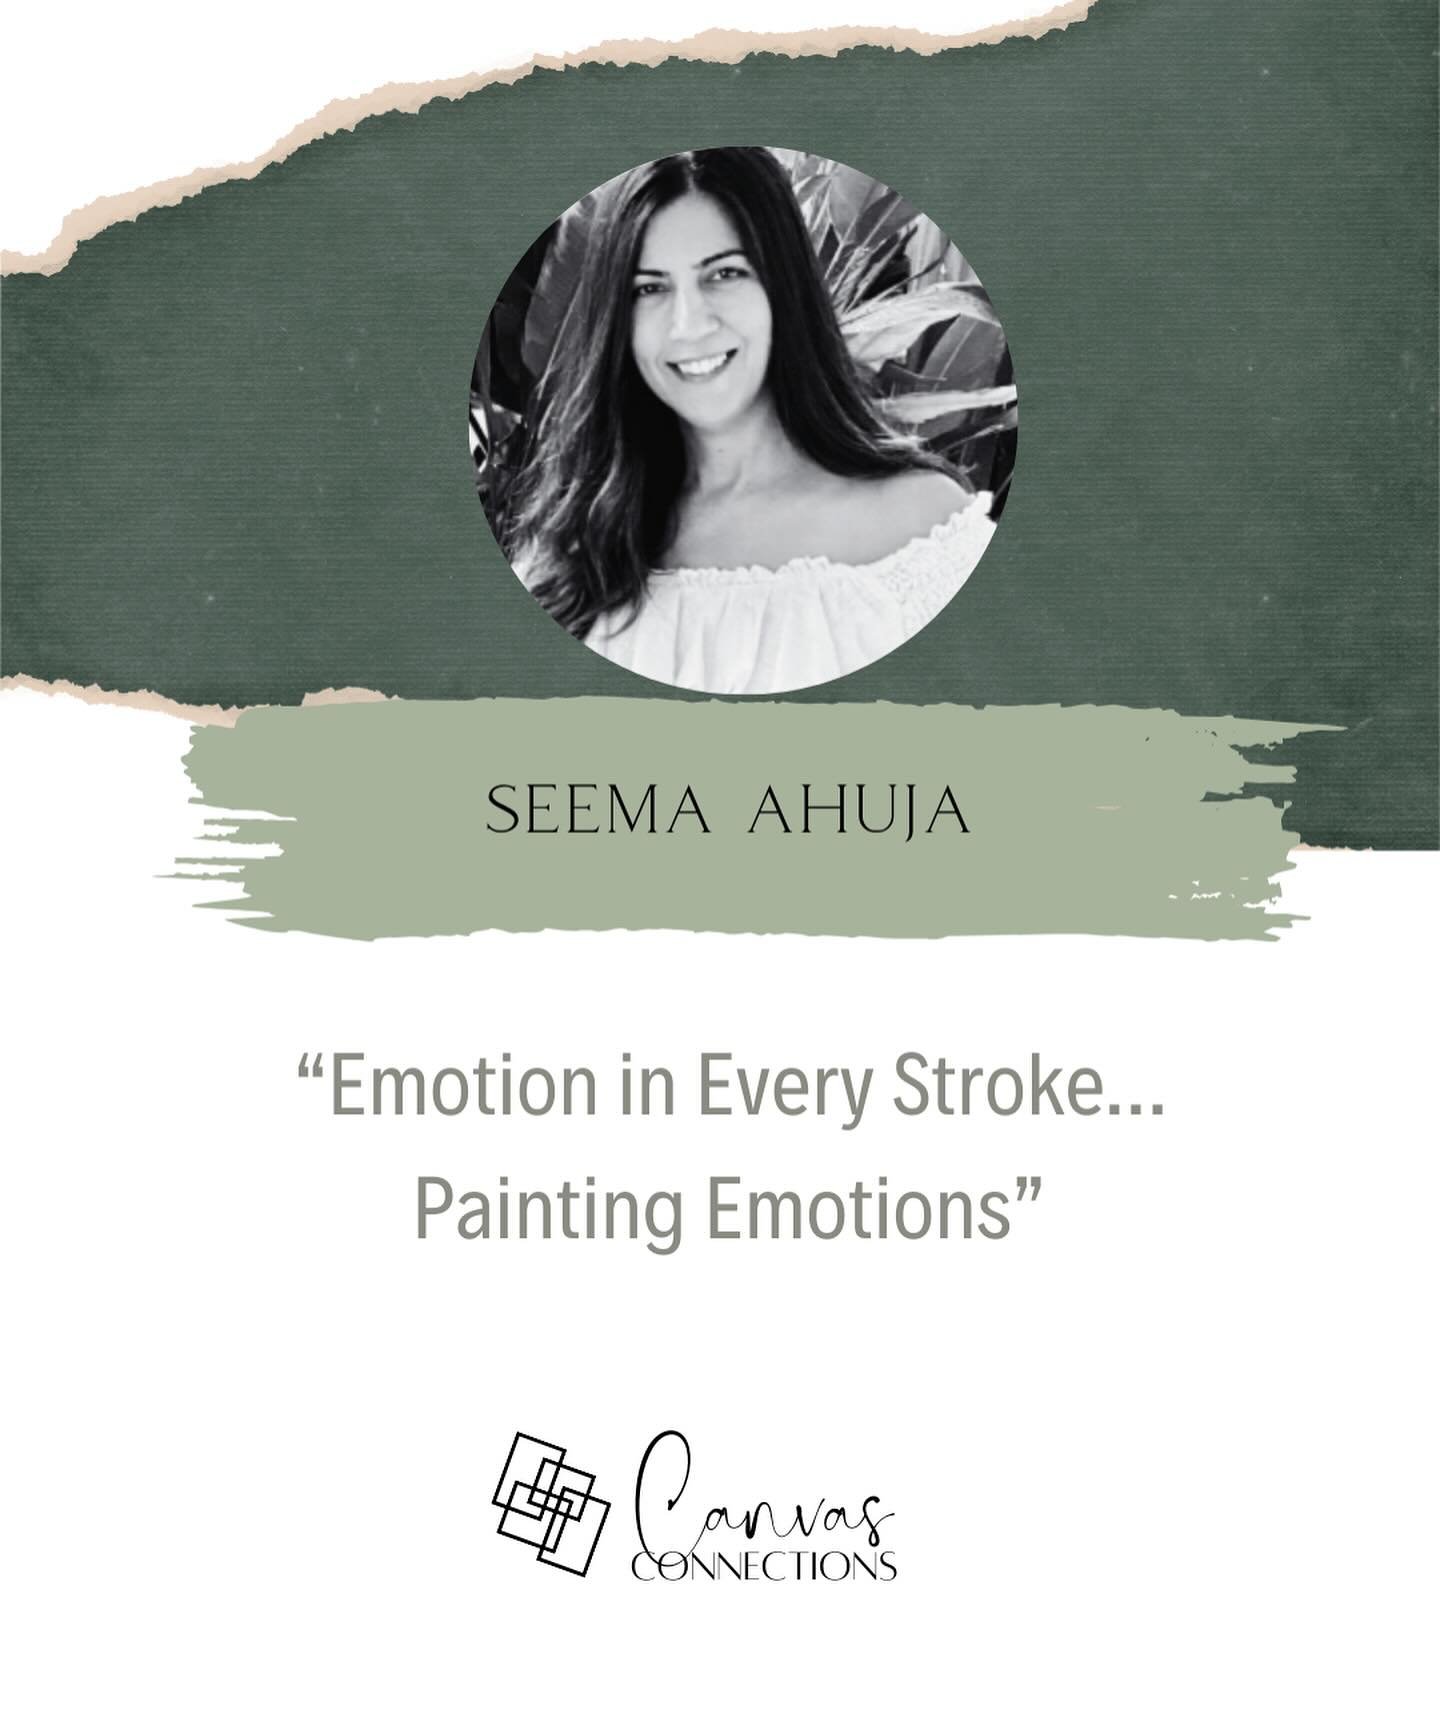 Seema Ahuja.
&ldquo;I am inspired by my surroundings, by flowers, by music or by ideas that already are in my mind. I create free flowing composition that convey an ideal of beauty. My artworks are abstract and are characterized by a vibrant colour p